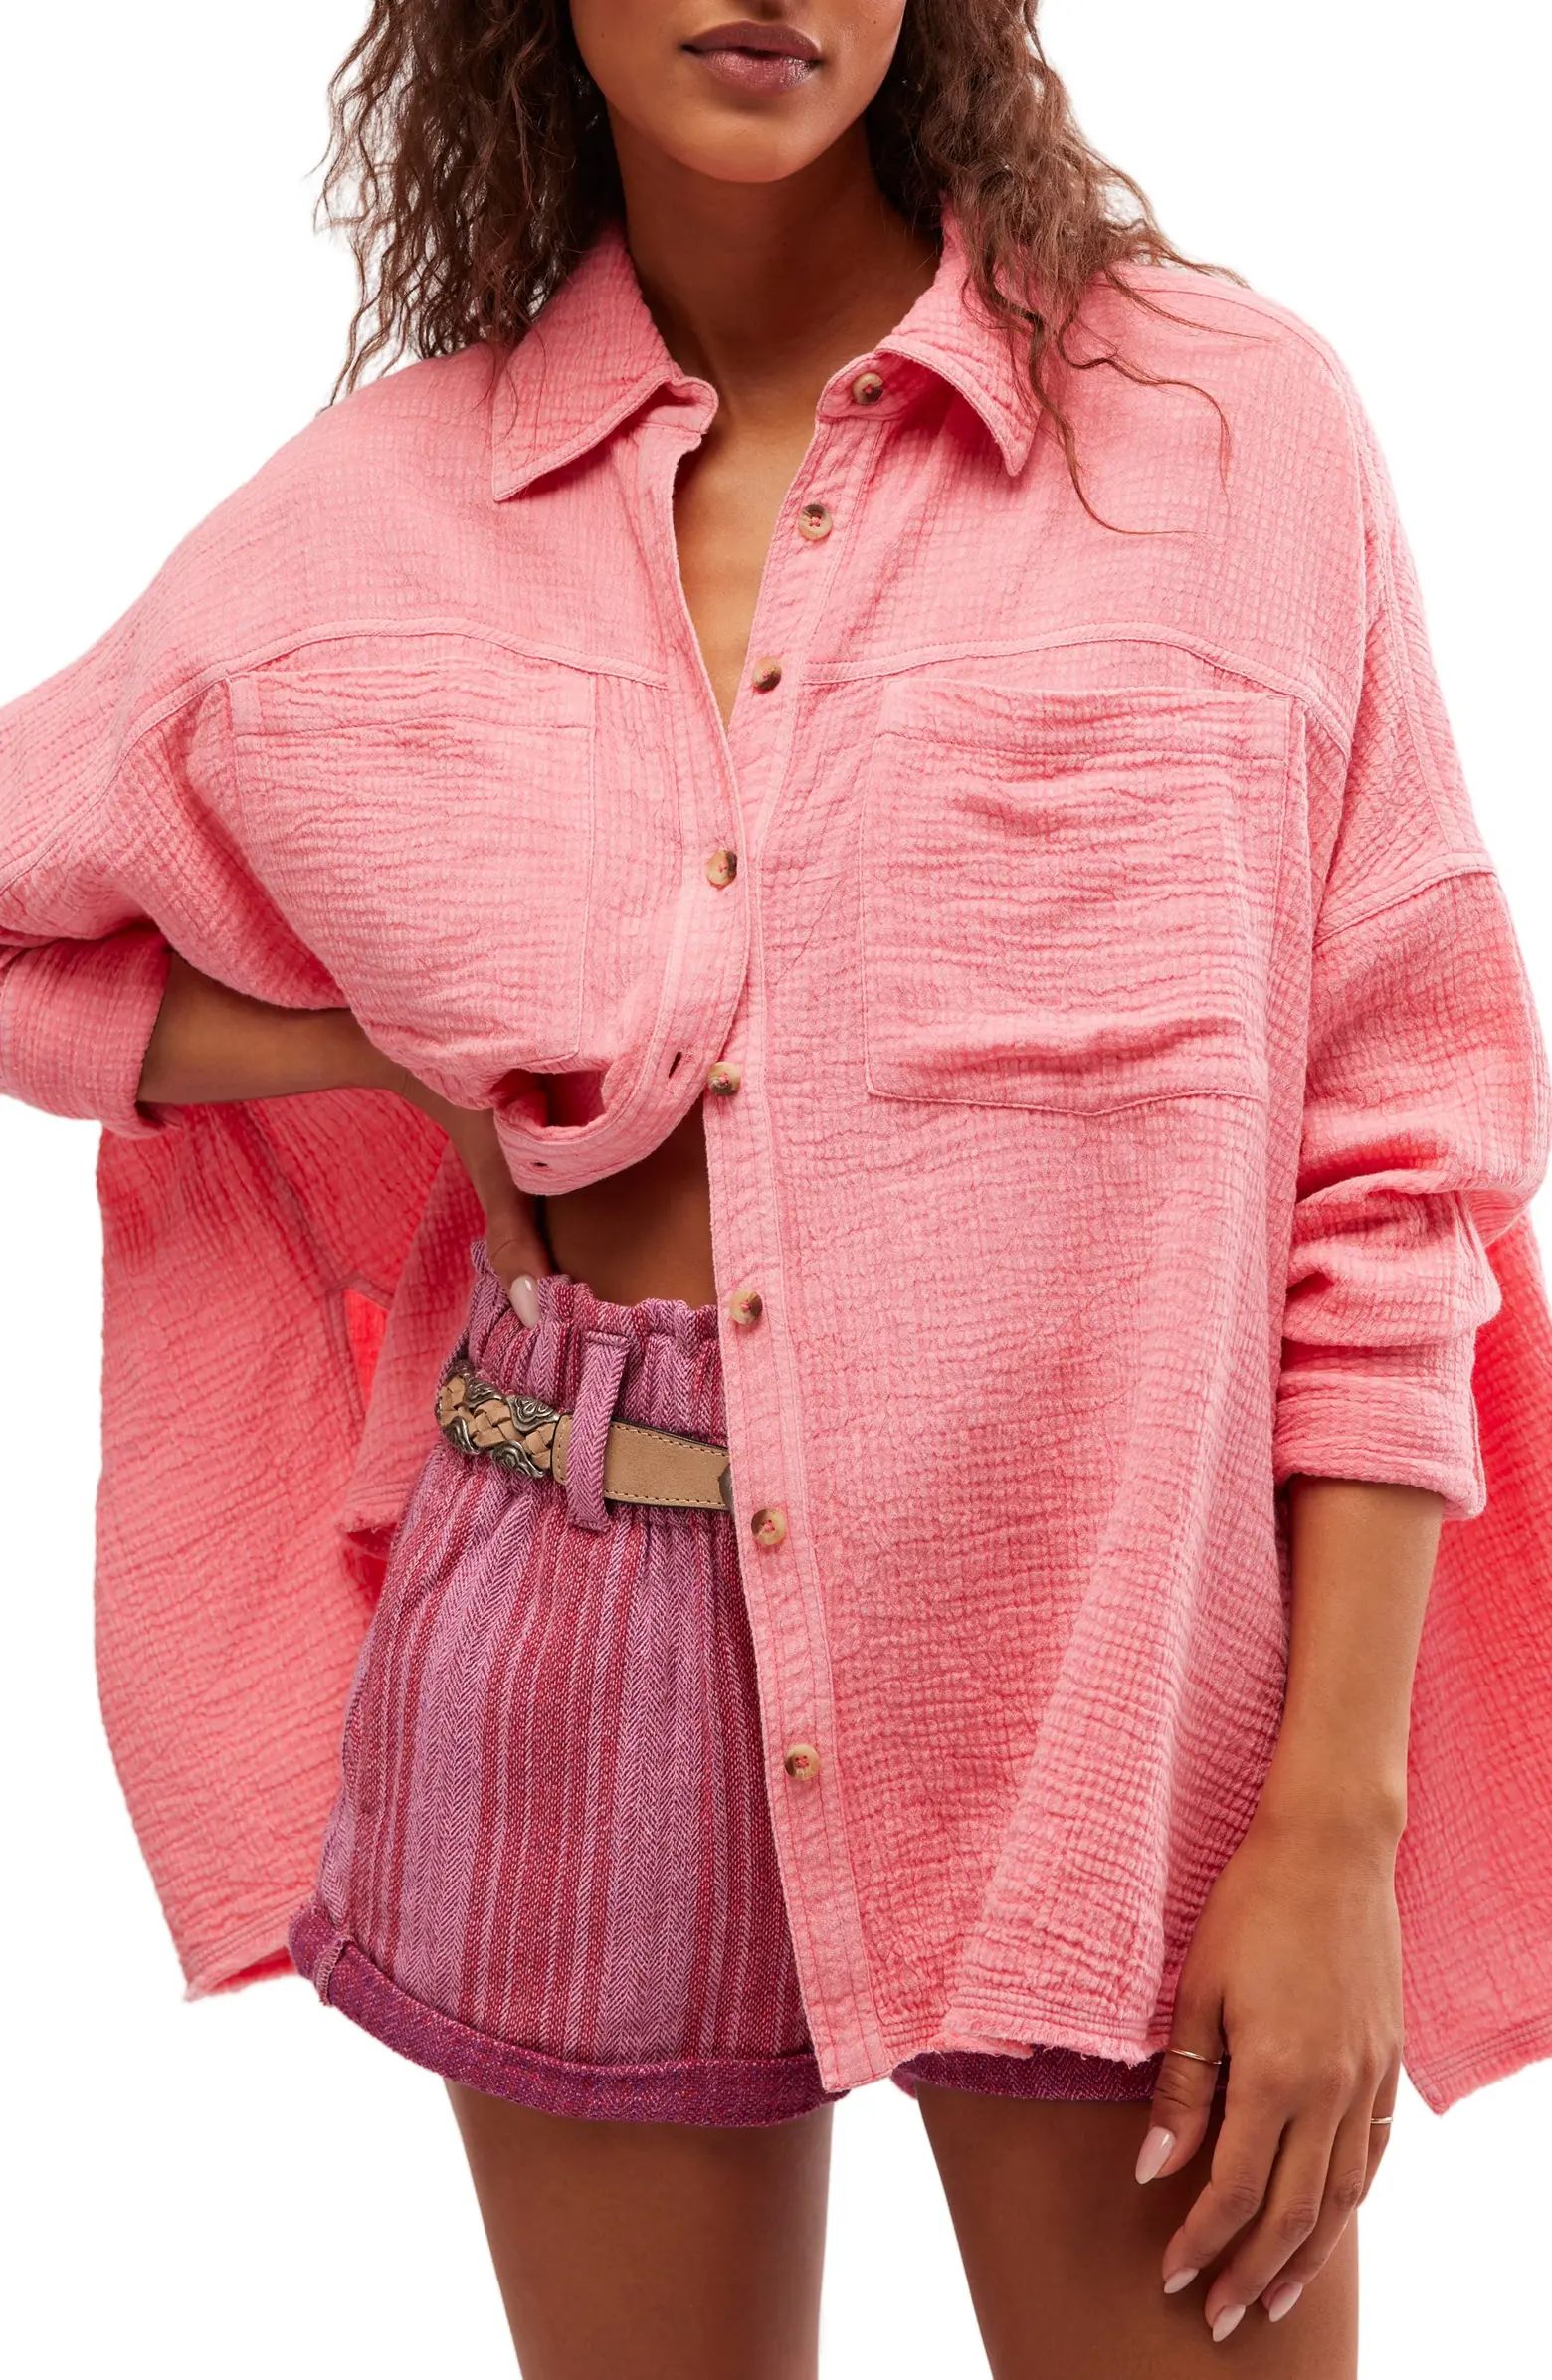 Cardiff Cotton Gauze Button-Up Shirt | Nordstrom